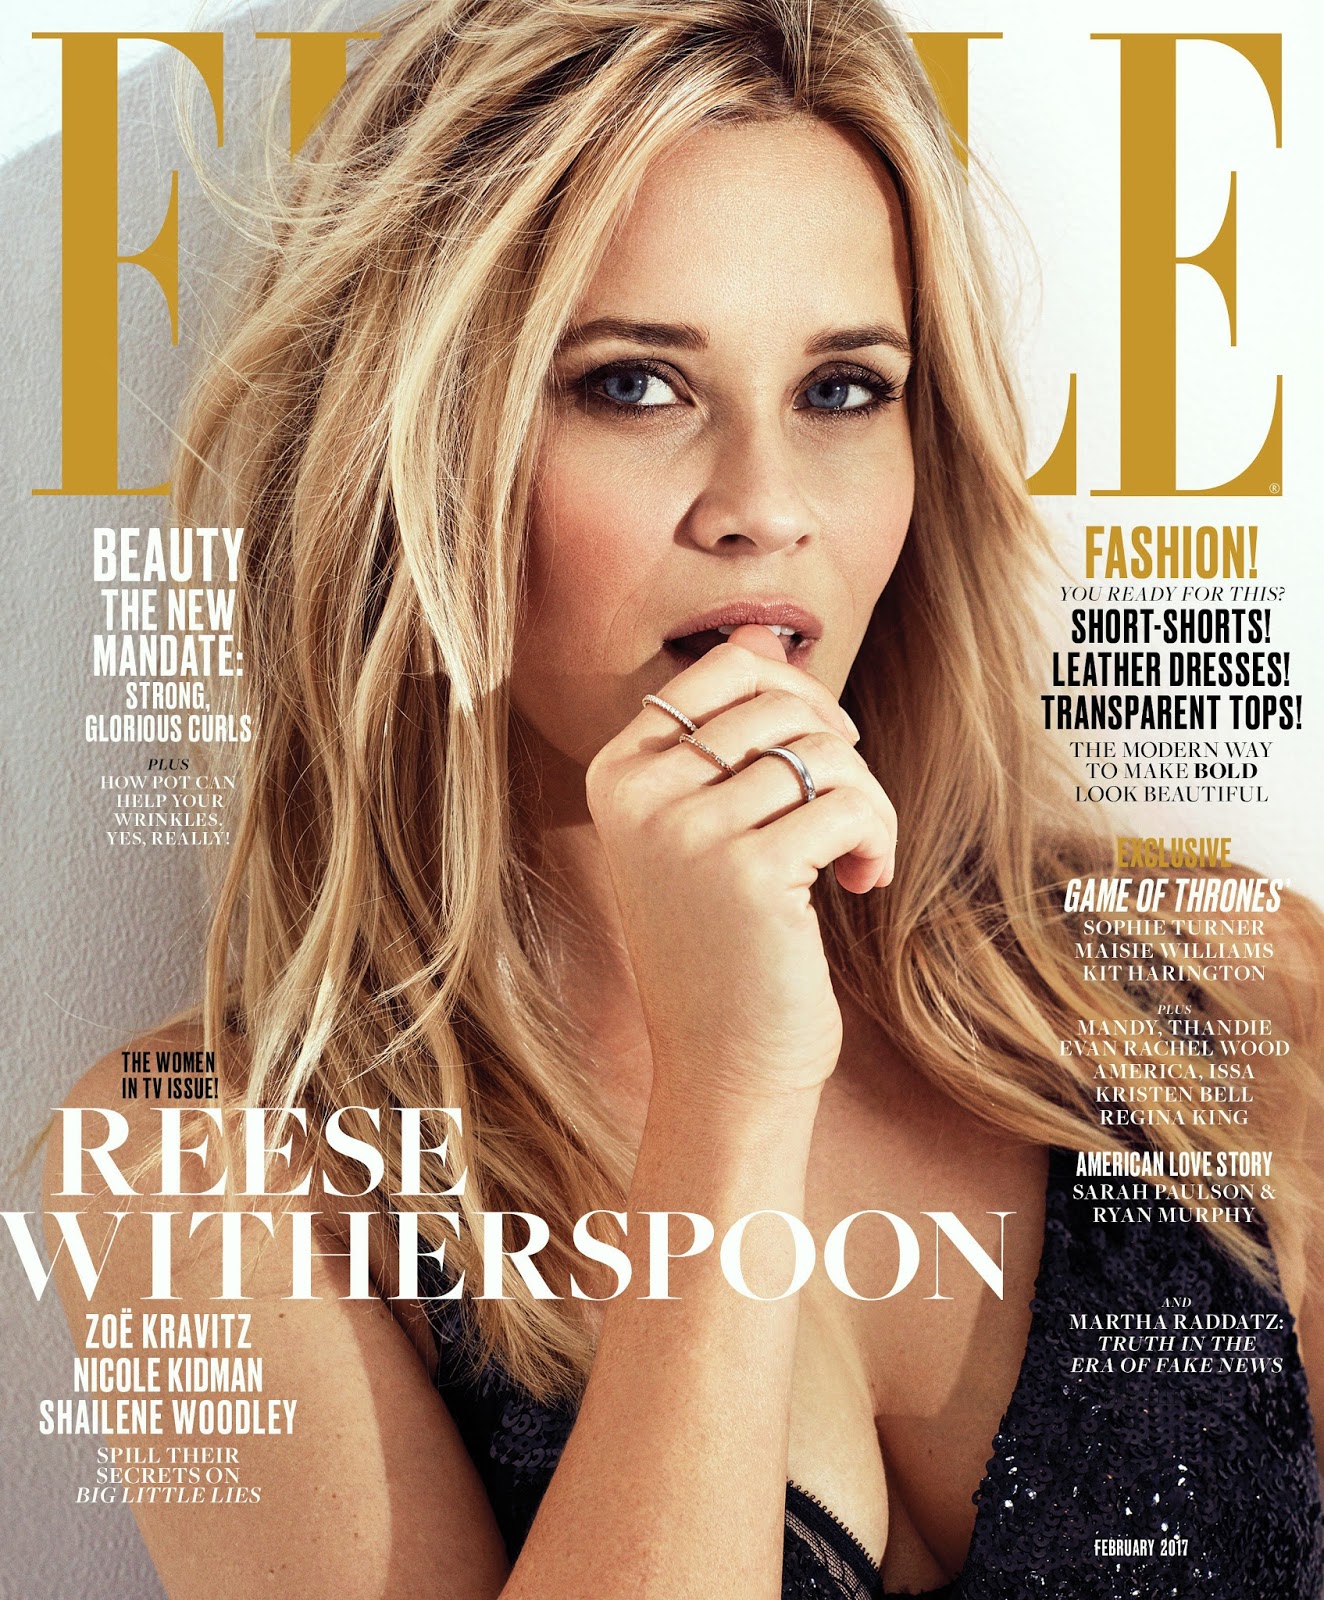 THE EDIT: Reese Witherspoon by David Bellemere